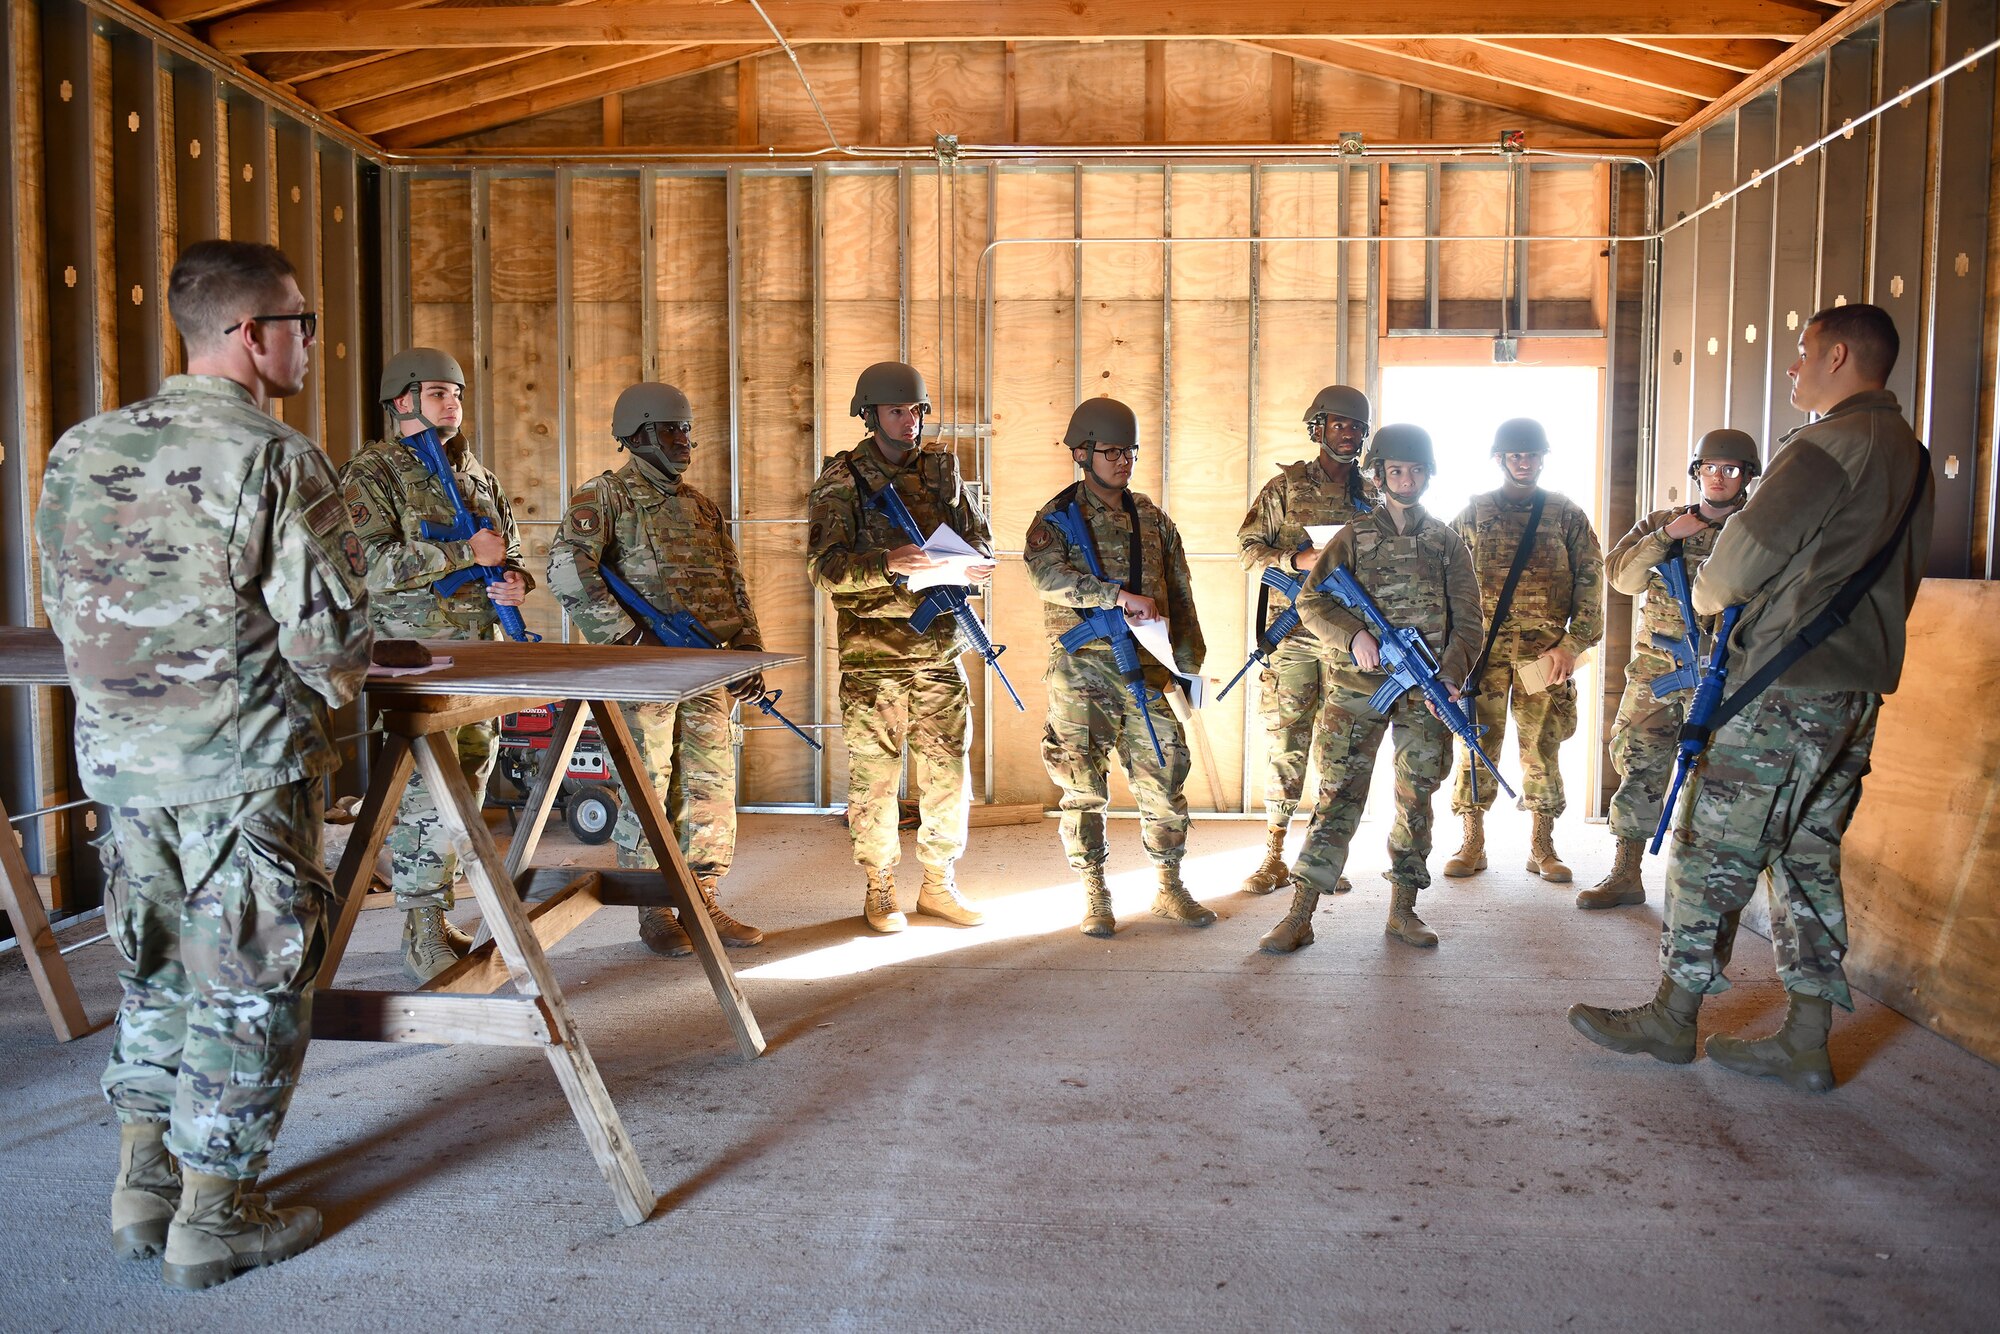 Group of Airmen gather during a training exercise at Altus AFB.